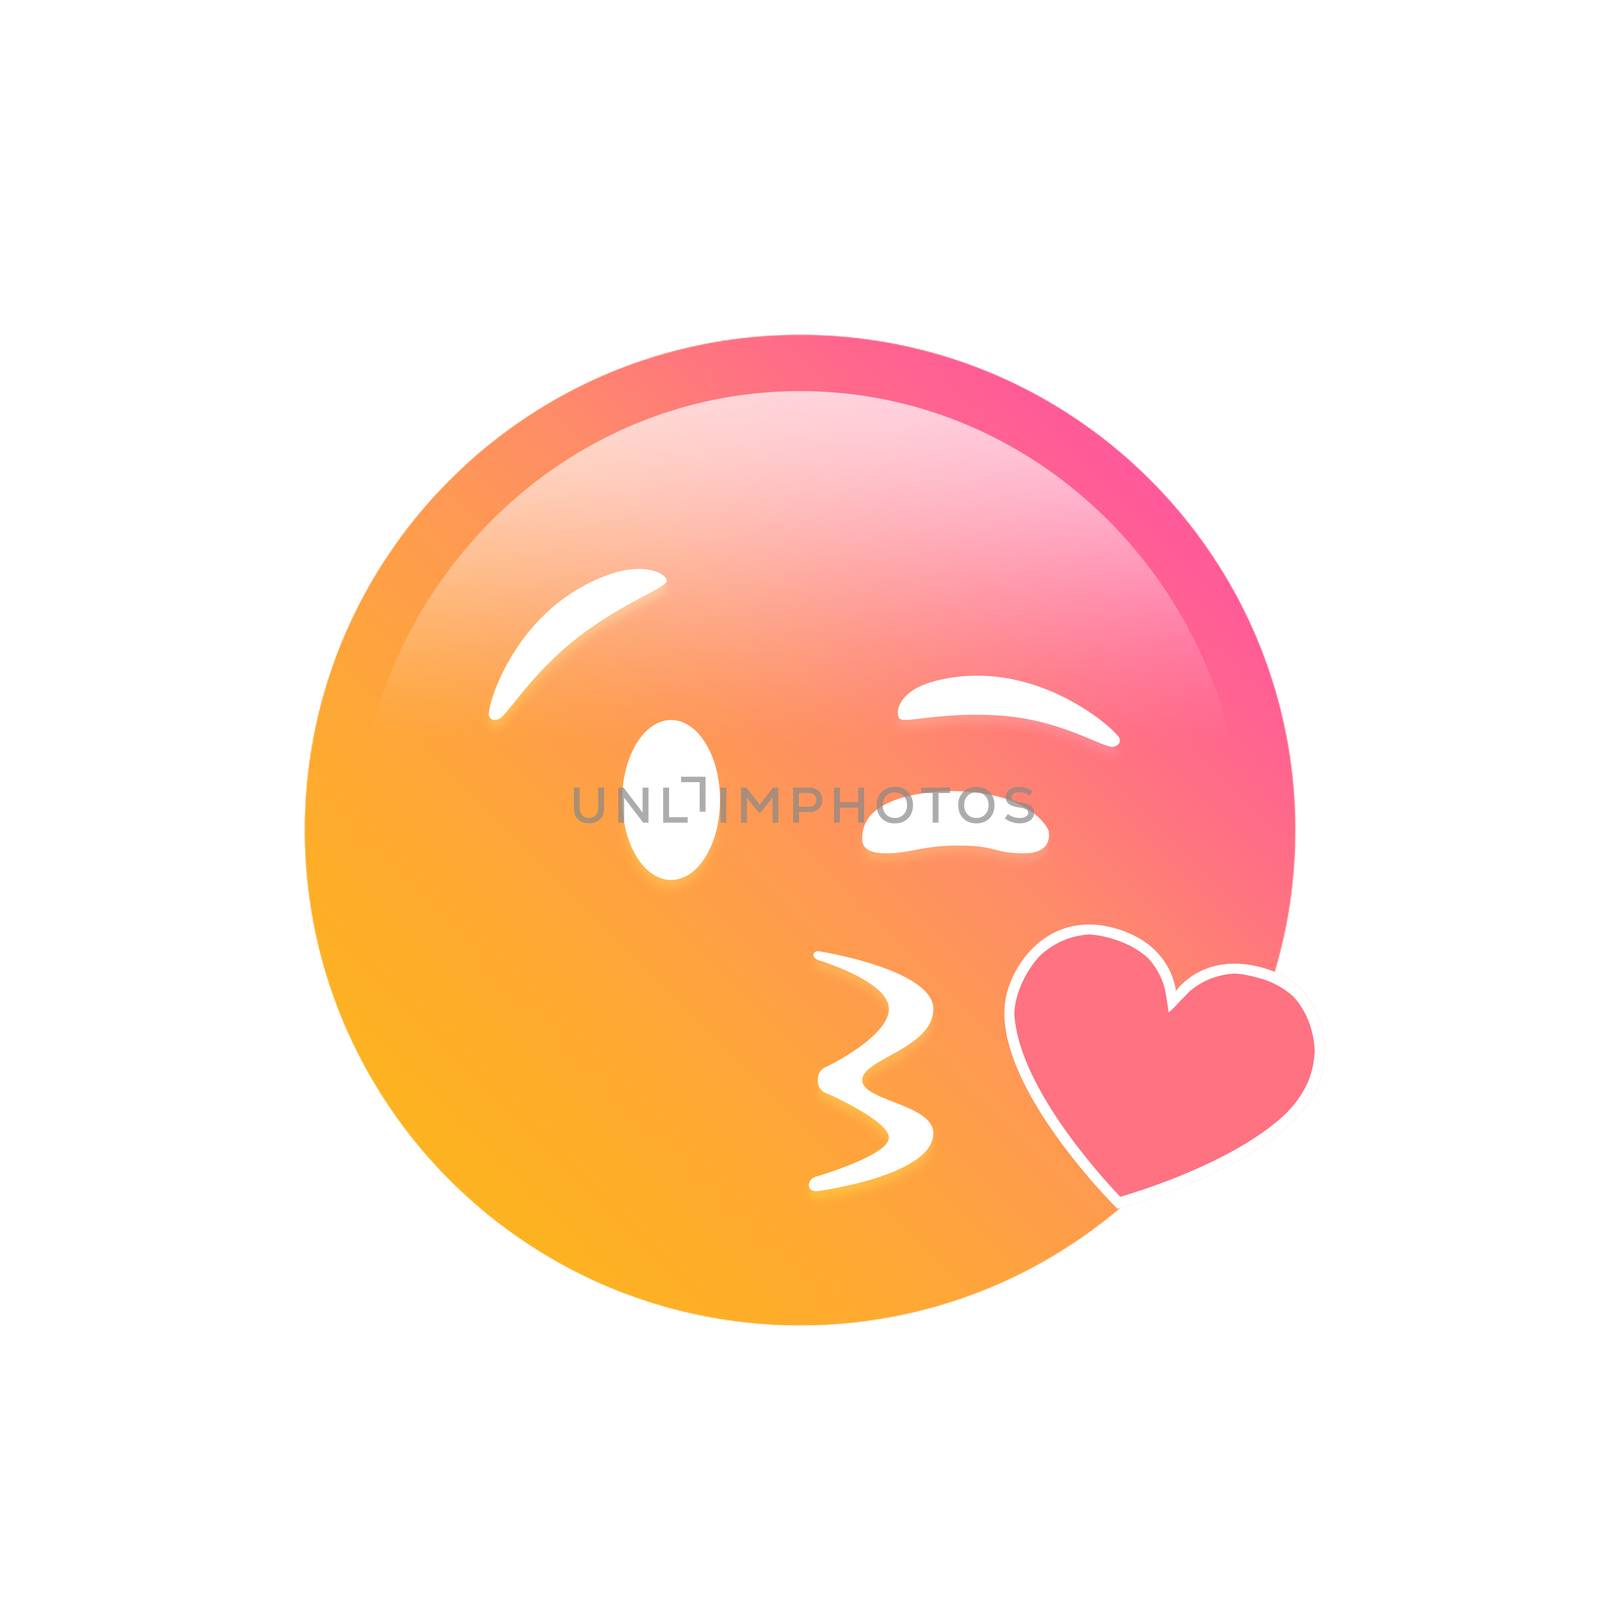 The isolated gradient smiley face with kissing mouth icon